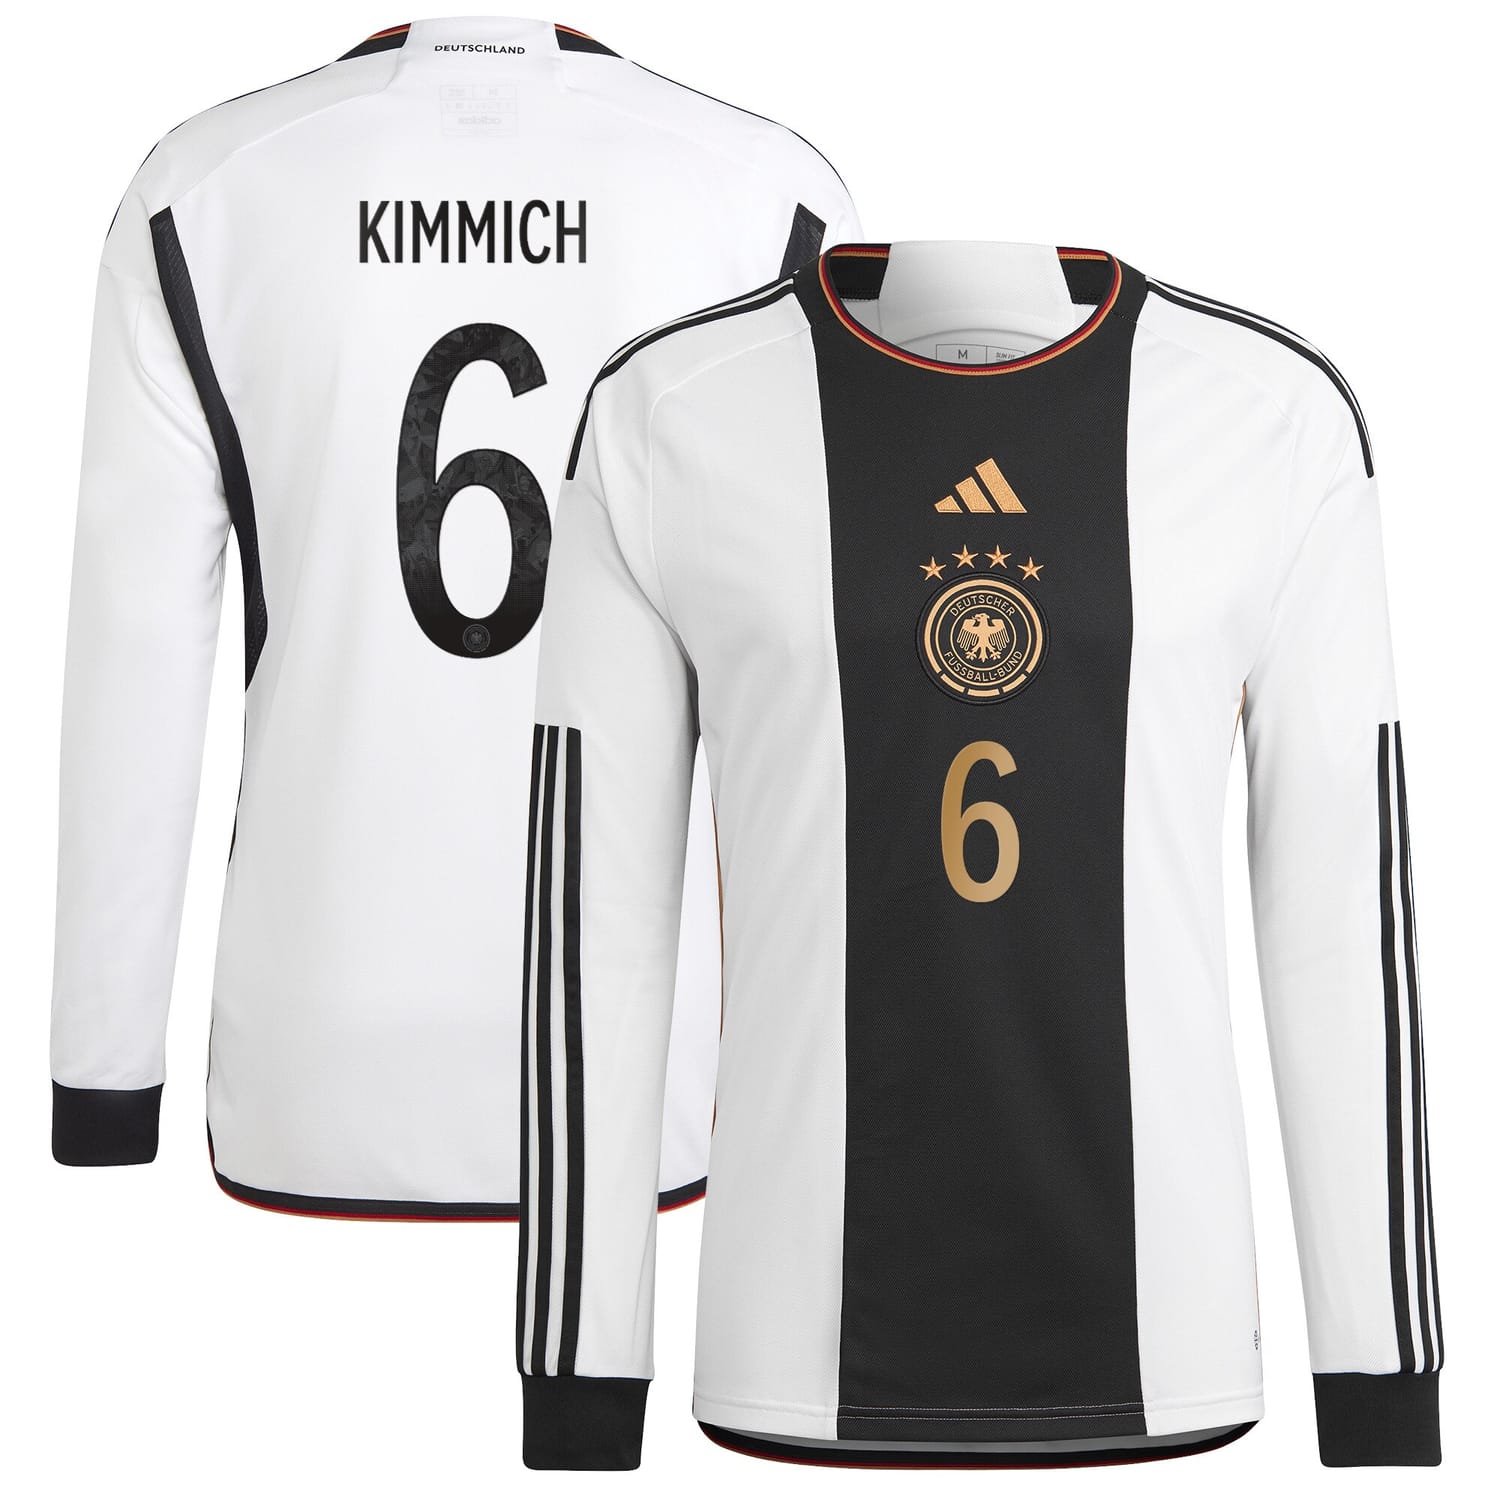 Germany National Team Home Jersey Shirt Long Sleeve player Joshua Kimmich 6 printing for Men